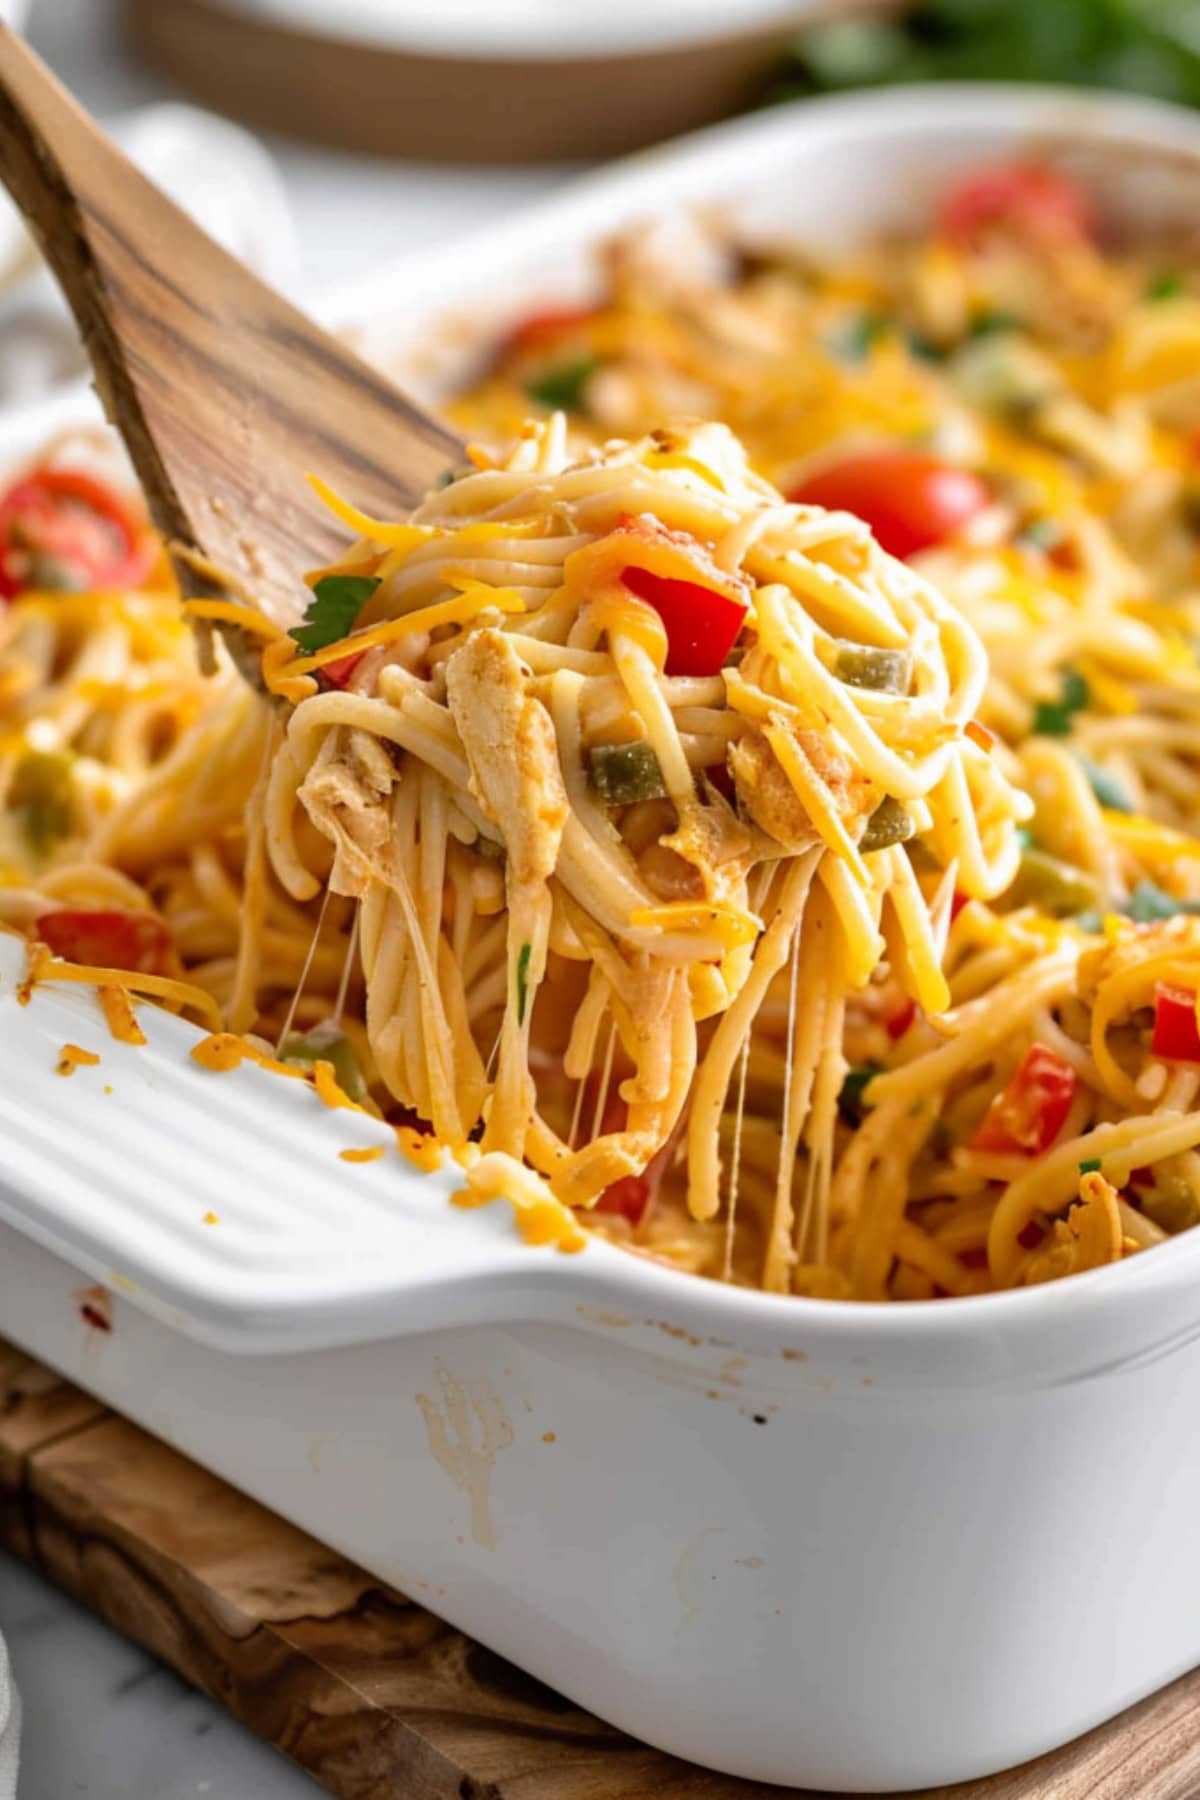 Cheesy chicken spaghetti casserole lifted by a wooden ladle.